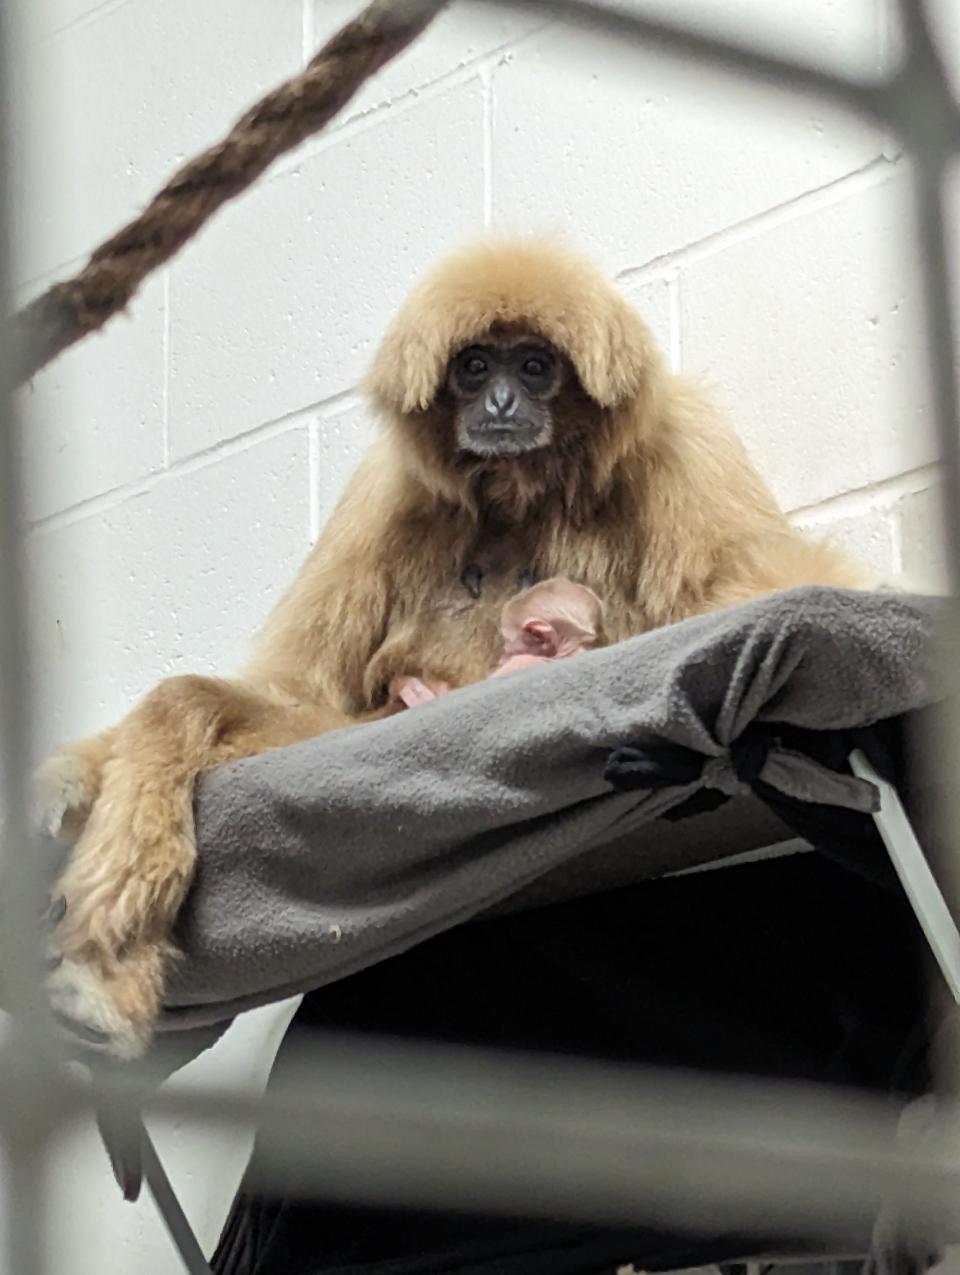 The Utica Zoo has announced the extraordinary birth of a white-handed gibbon baby.